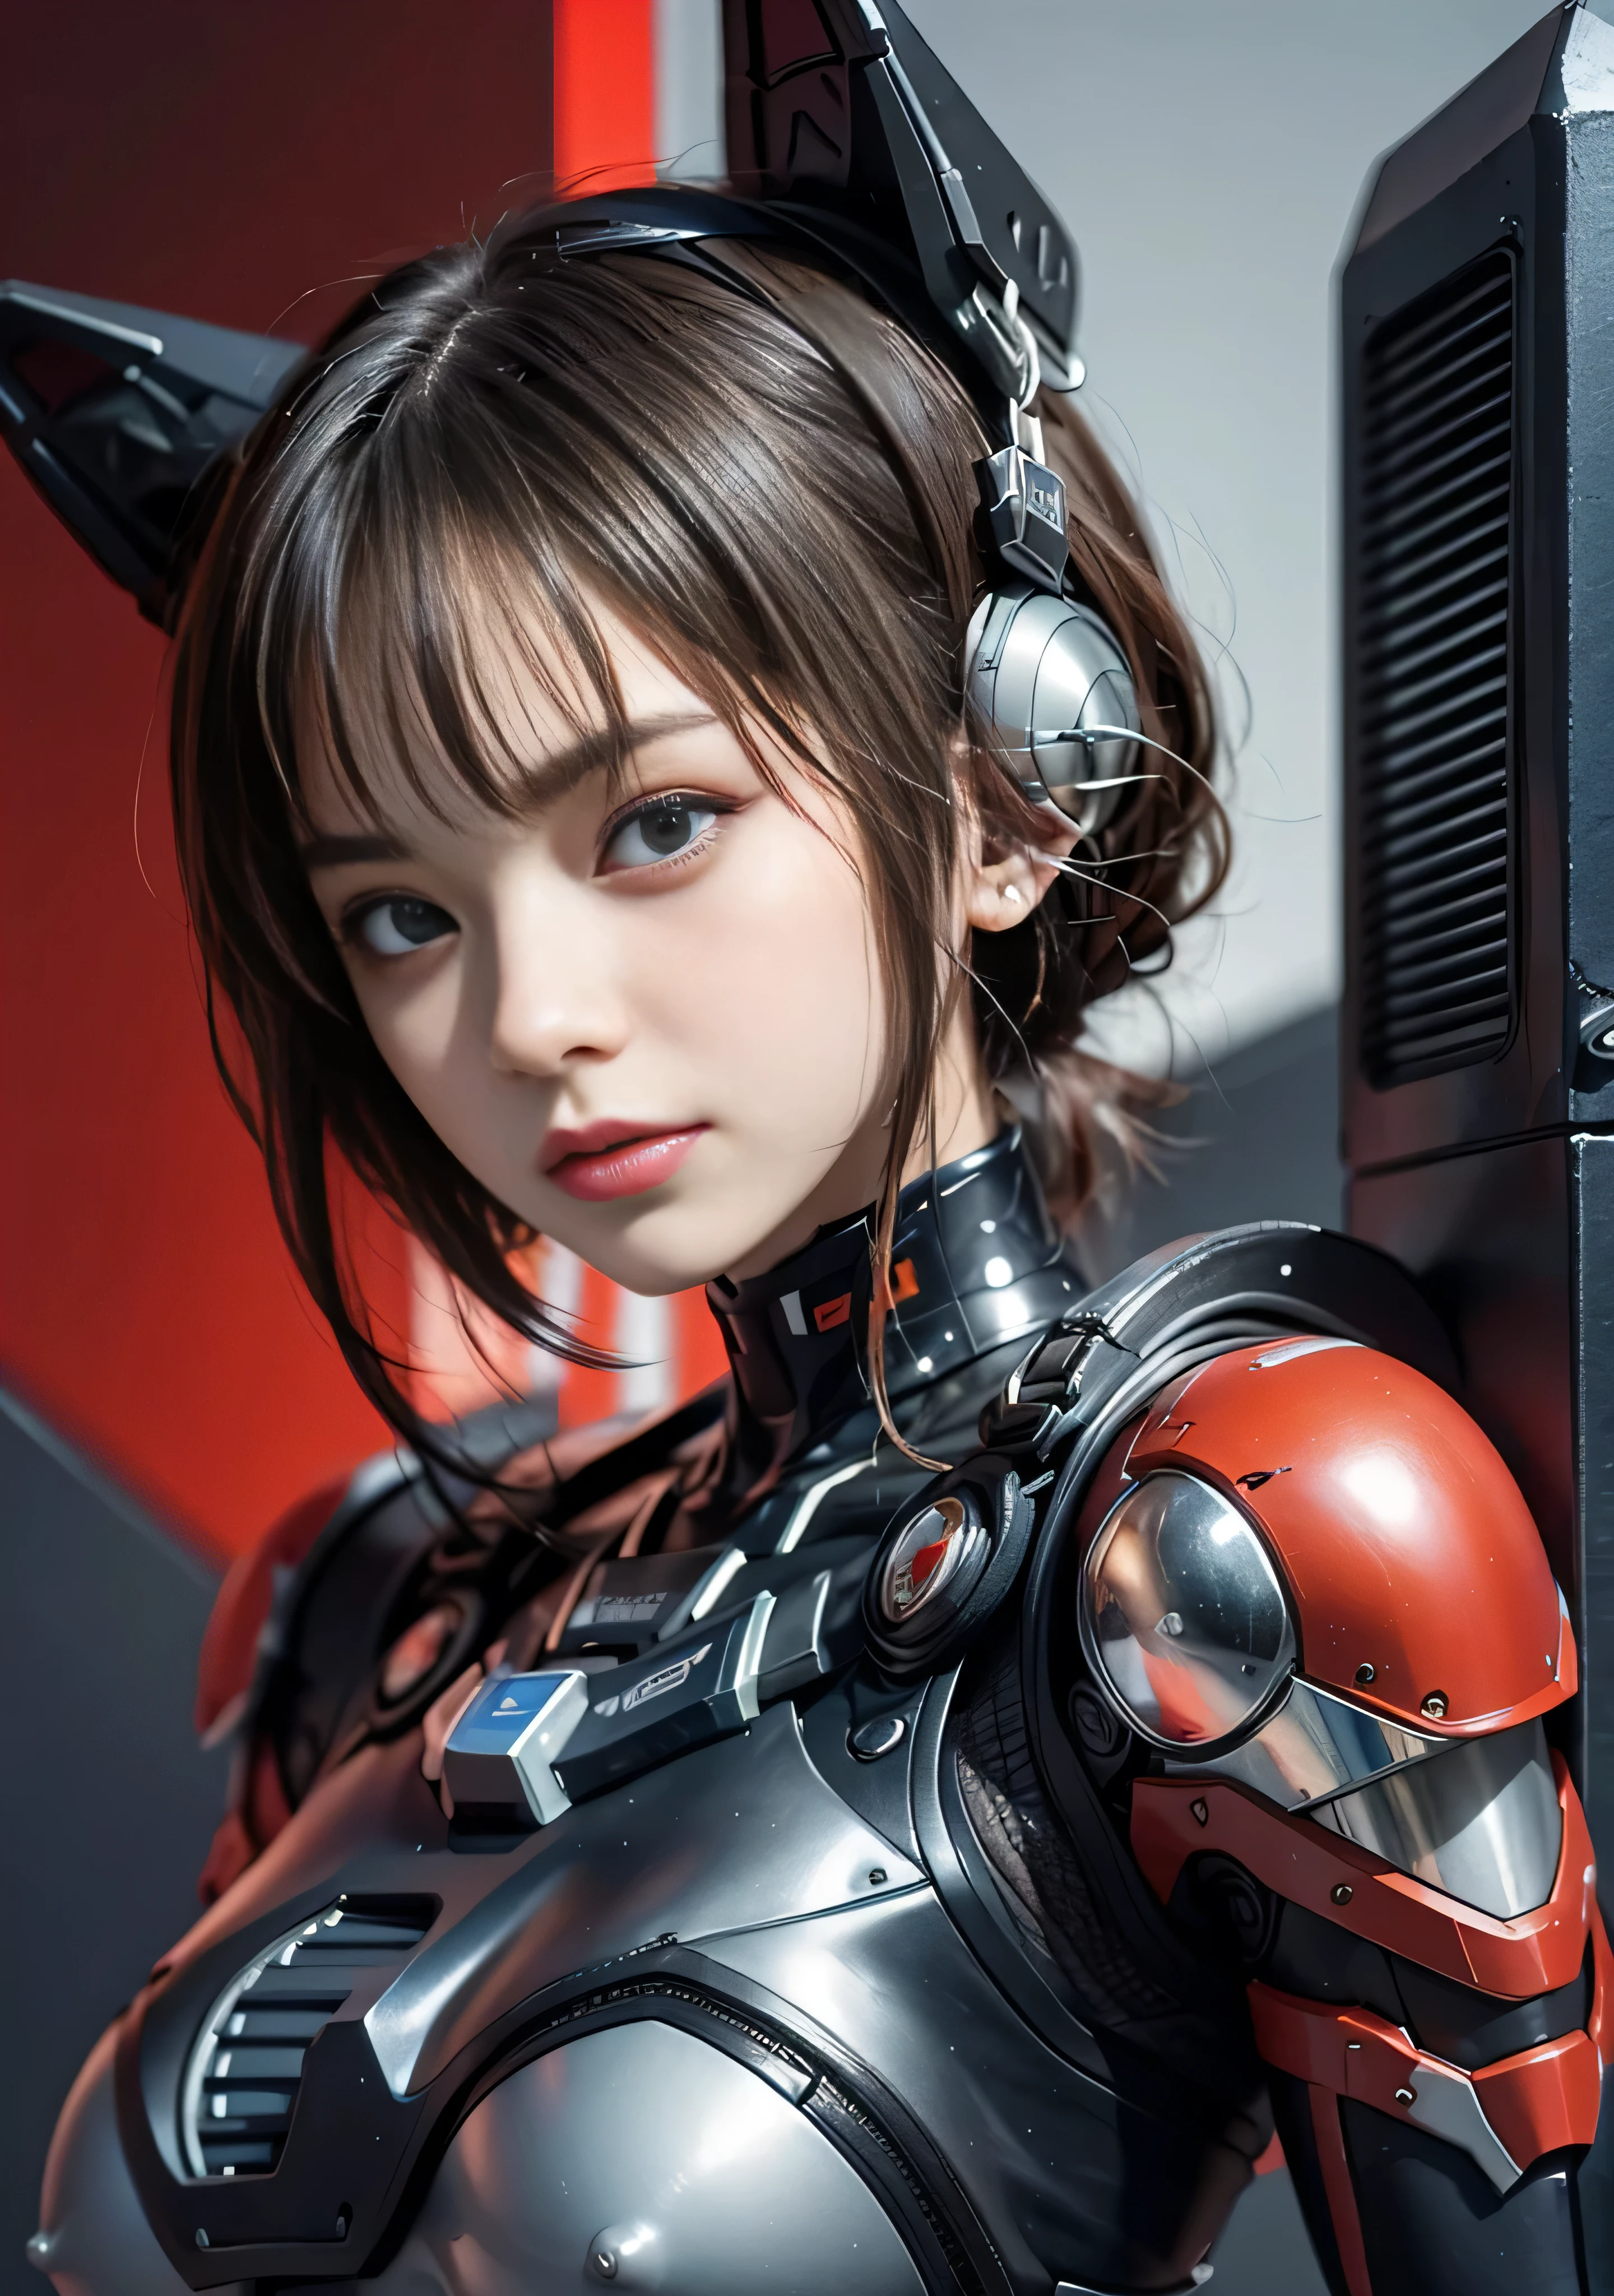 (RAW quality:1.4), Textured skin, Short Hair, Super detailed, Attention to detail, high quality, 最high quality, High resolution, 1080p, hard disk, young, beautiful,(cyborg),beautifulcyborgwoman,Mecha Cyborg Girl,Battle Mode,Girl with a mechanical body, Embarrassed expression, She wears an erotic and revealing cyborg mech, (A boob machine that emits a strong red light), Cowboy Shot, Bare shoulders and cleavage, From the underbust to the abdomen, exposed bare skin, (hard nipples erect:1.4), (nipples pointing up:1.4), (A little pubic hair:1.4), White Gundam Mecha, Combat pose,